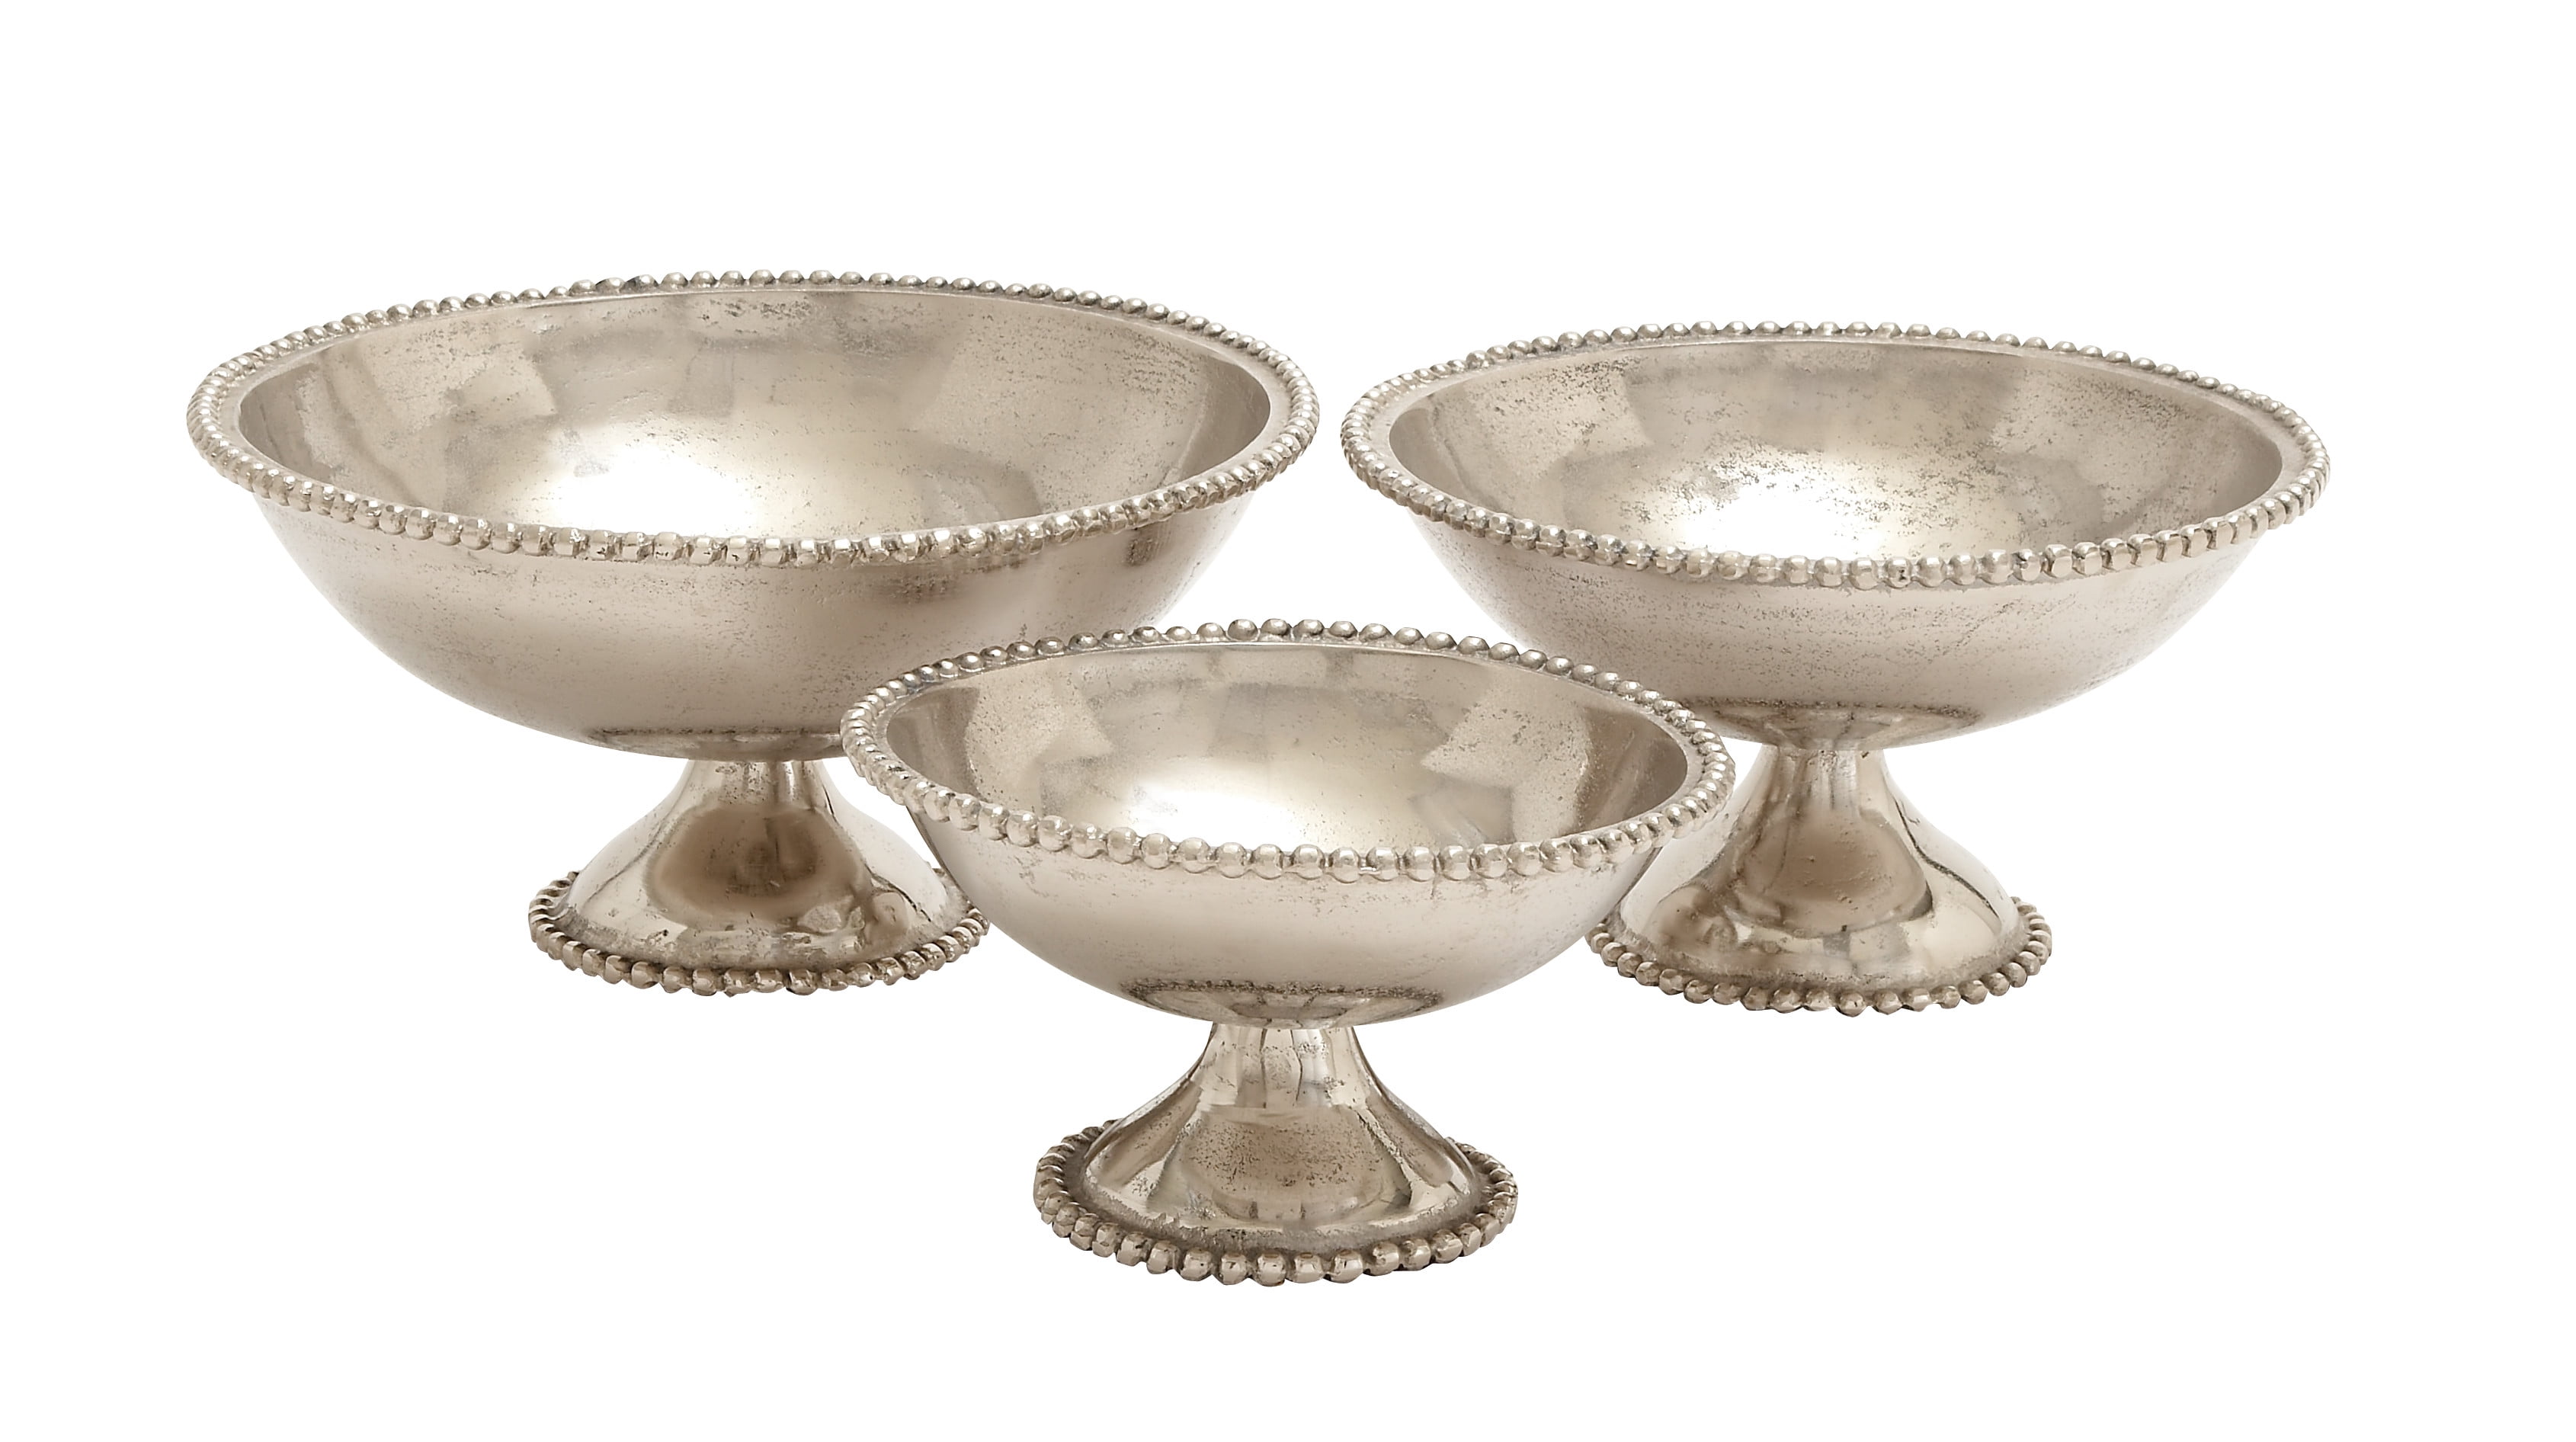 New Decorative Textured Silver Pedestal Bowl with Round Foot Made in India 